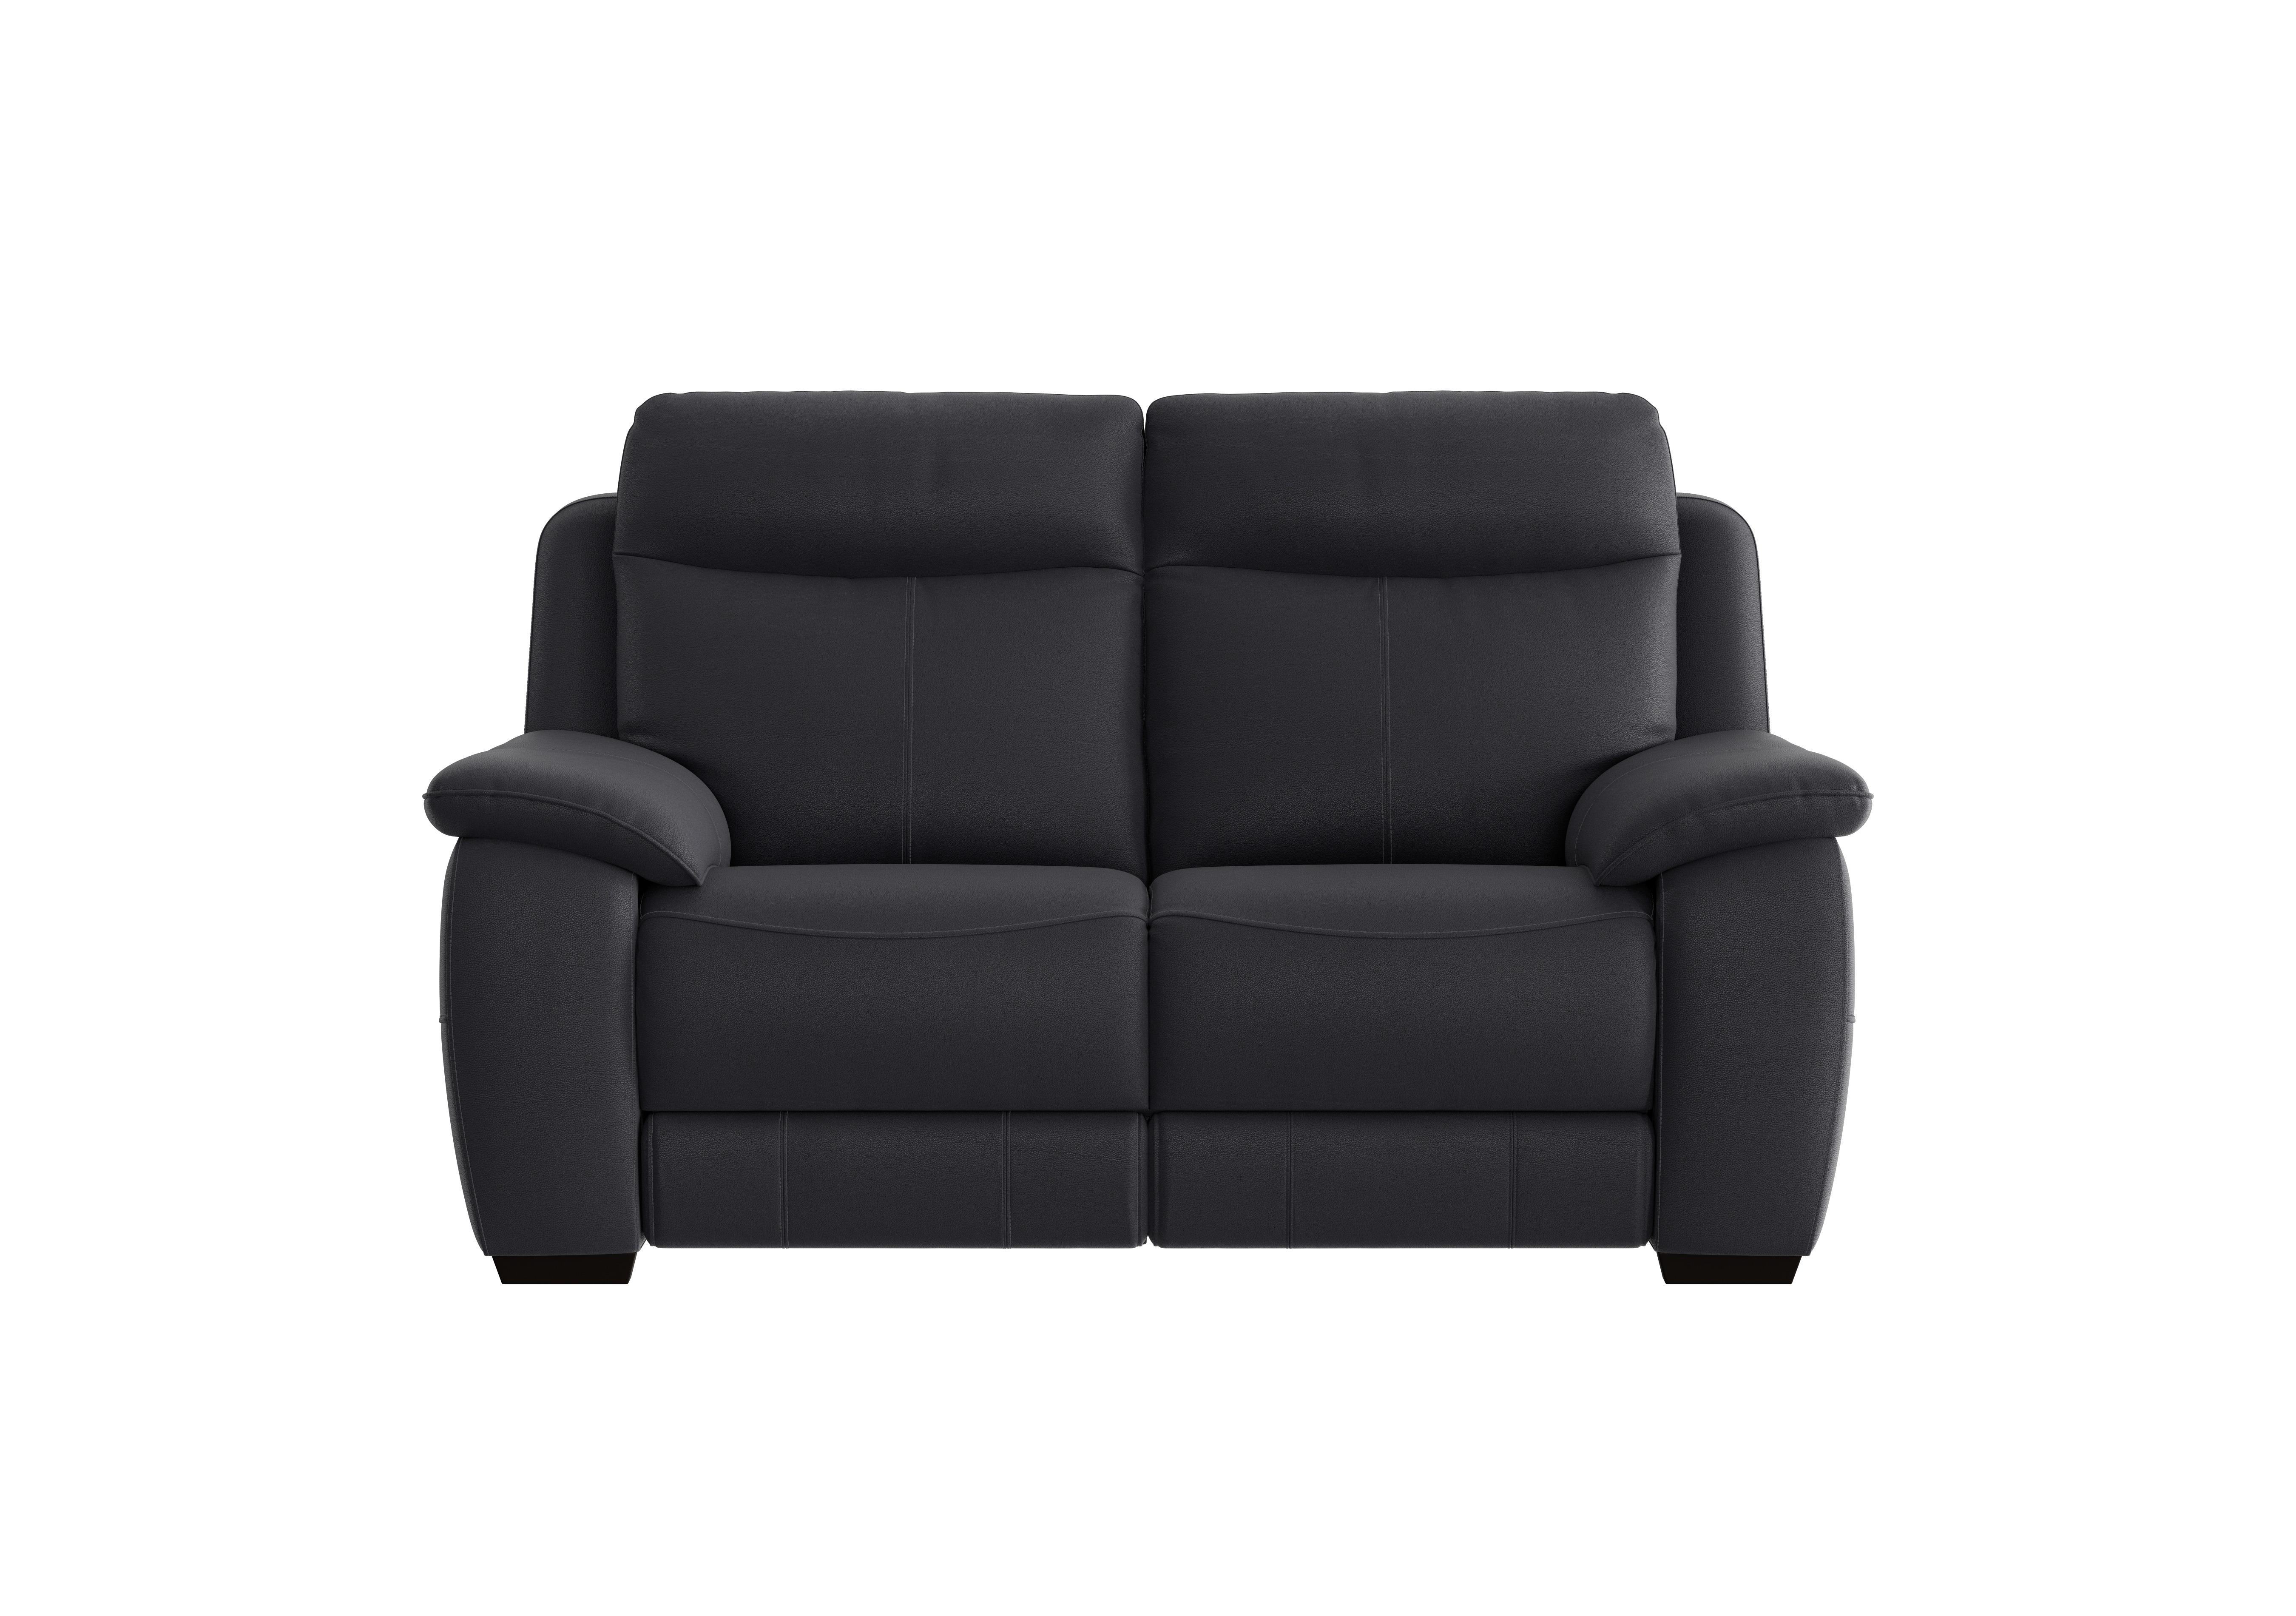 Starlight Express 2 Seater Leather Recliner Sofa with Power Headrests in Bv-3500 Classic Black on Furniture Village